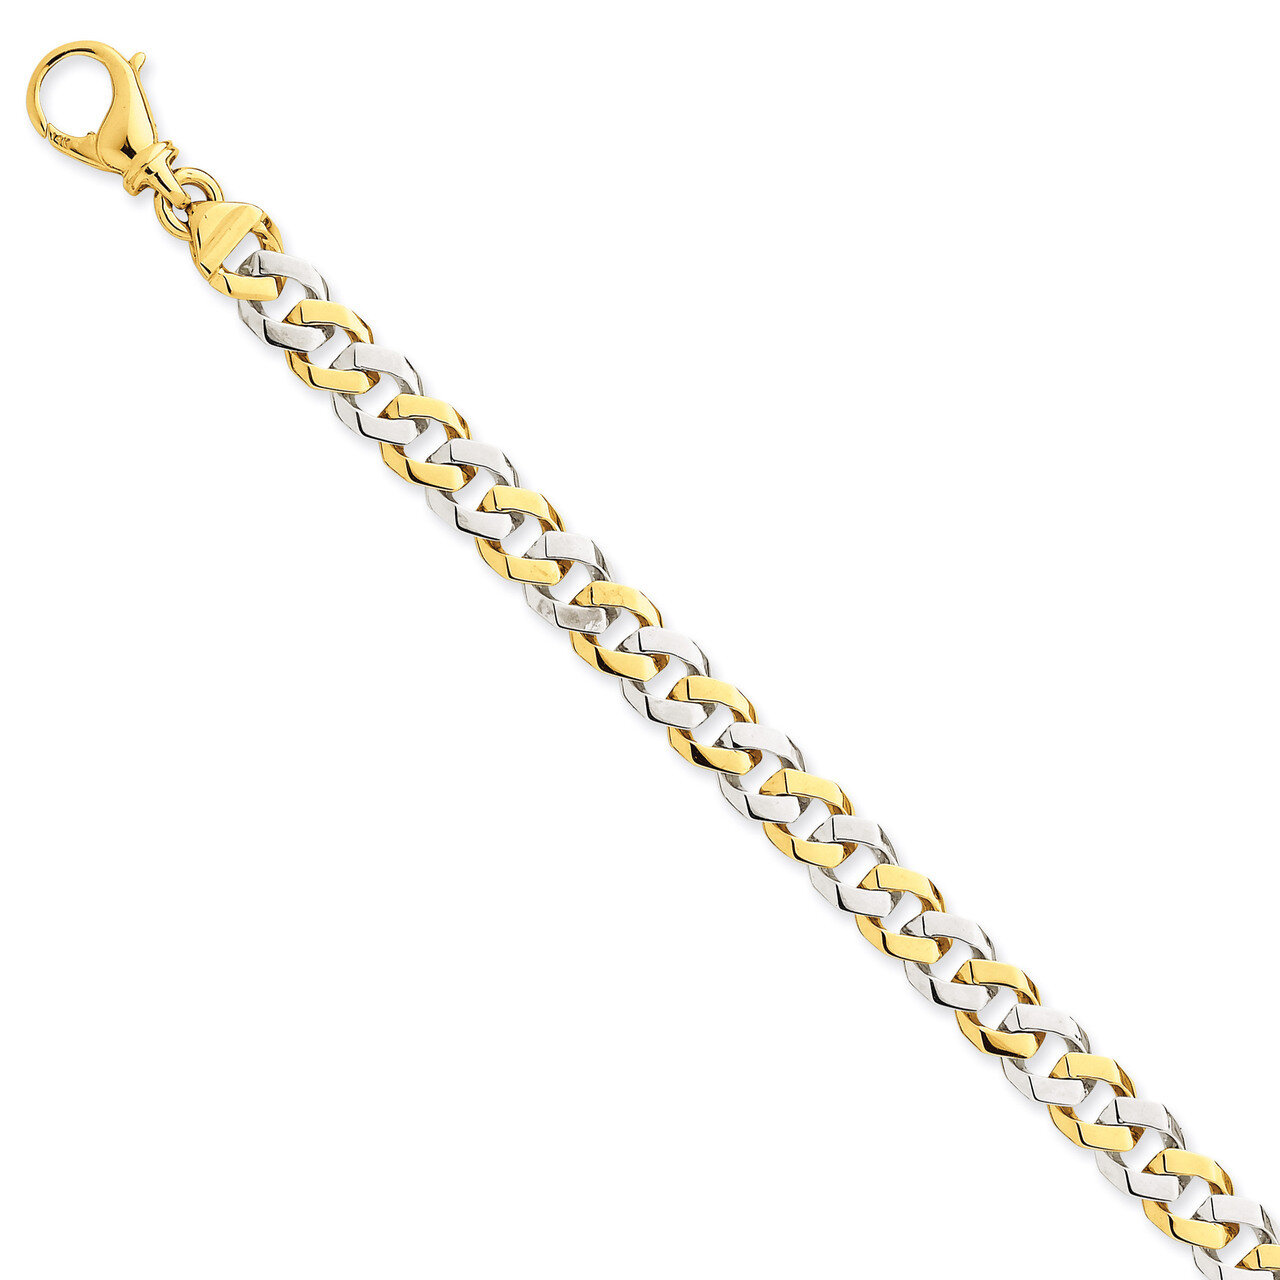 7.85mm Polished Fancy Link Chain 18 Inch 14k Two-Tone Gold LK515-18